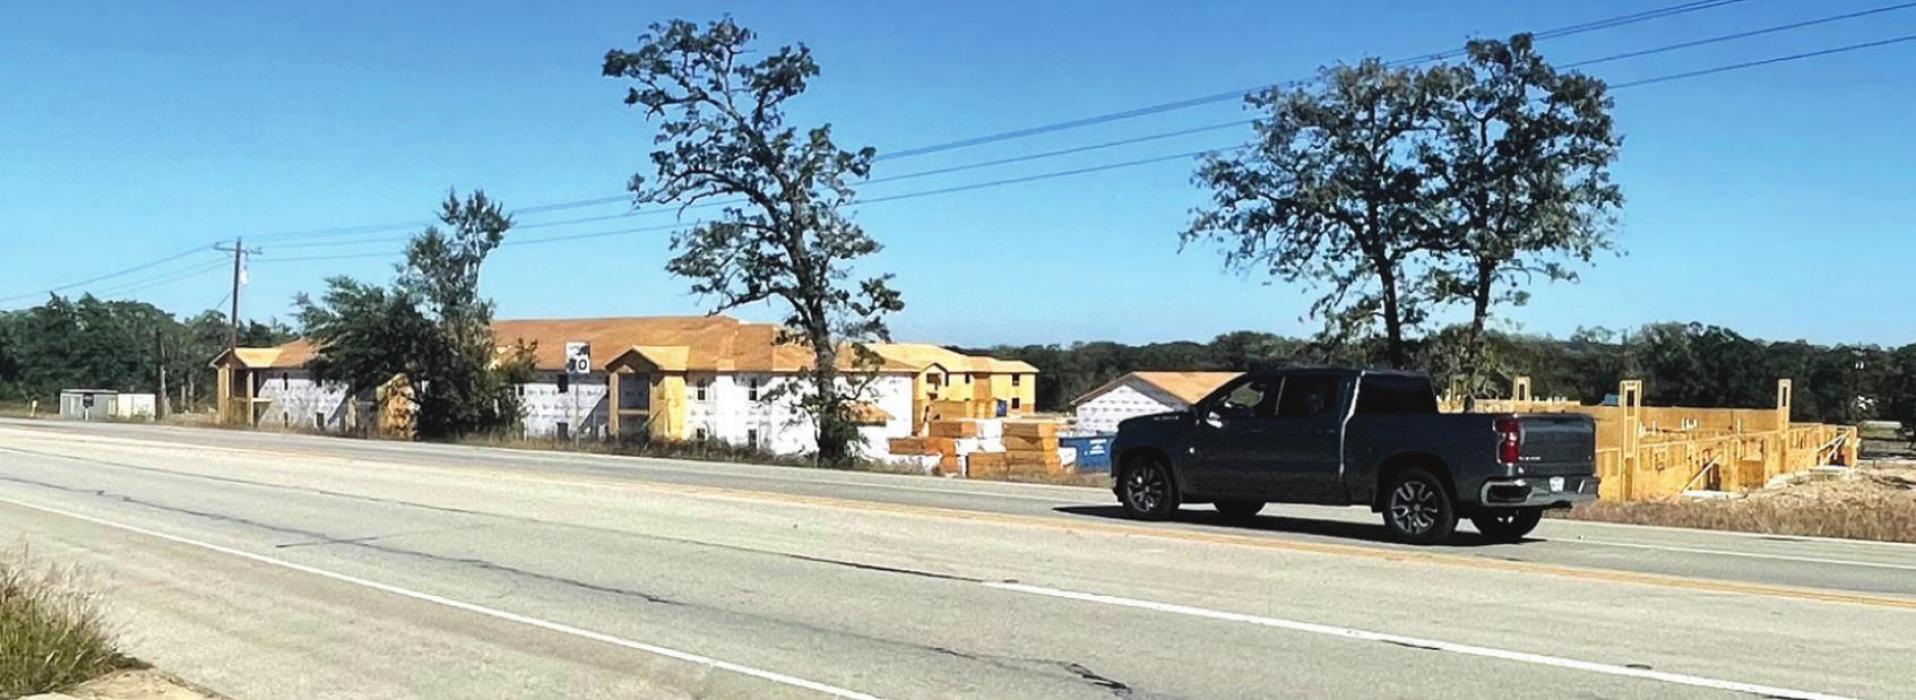 A pickup drives past the construction site for the La Grange Springs apartment complex on US 77 on the north side of La Grange. Texas Department of Transportation plans to expand US 77 into a four lane divided highway through most of Fayette County north of La Grange. Photo by Andy Behlen